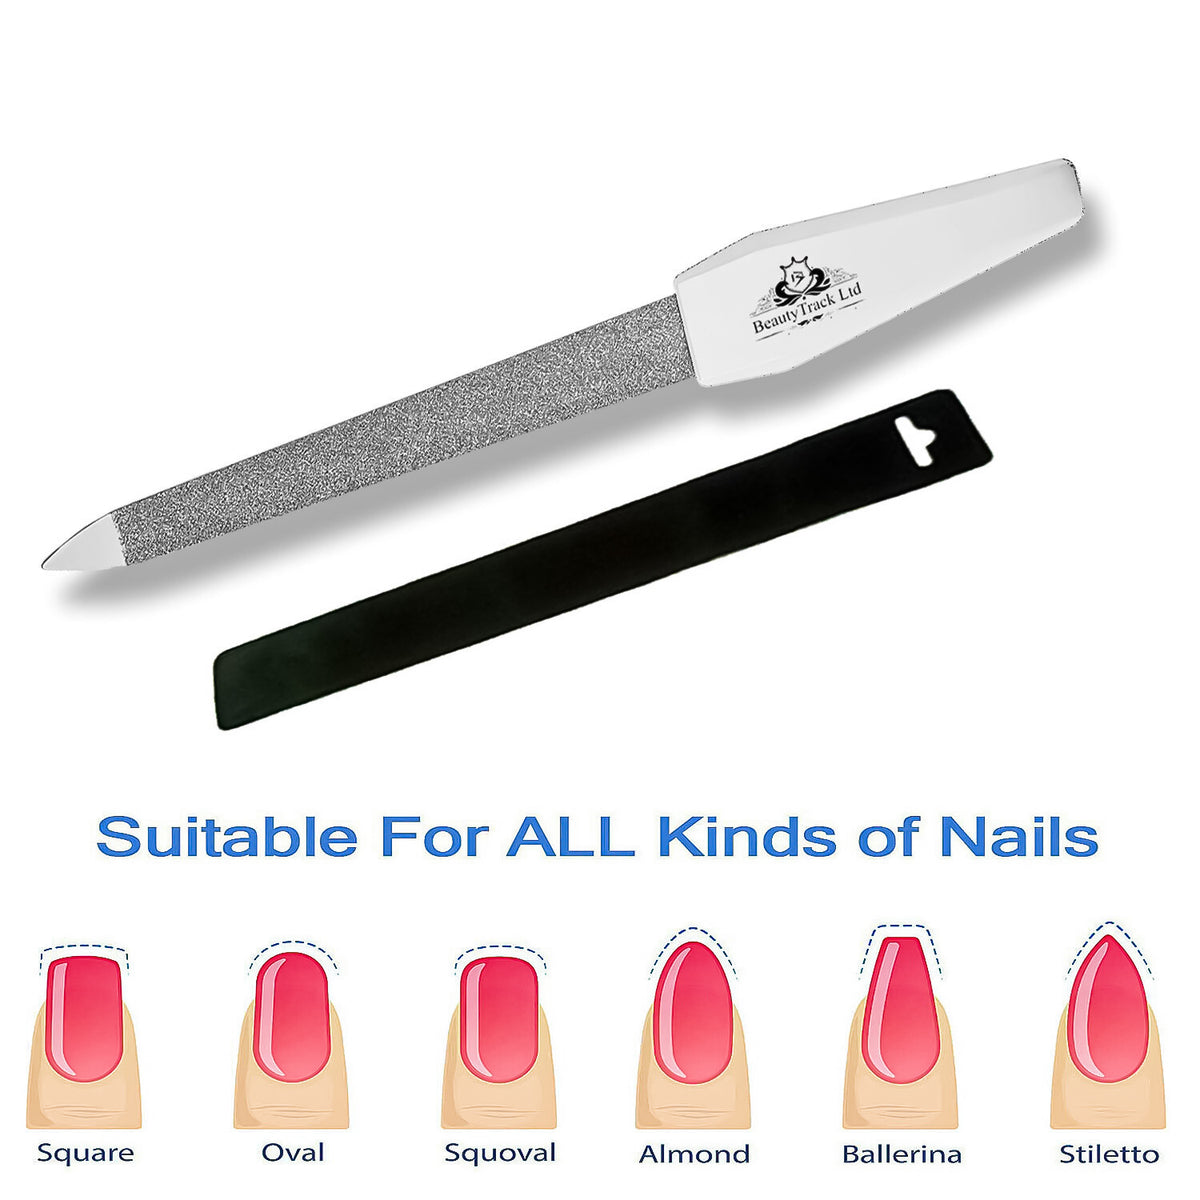 Stainless Steel Nail Files